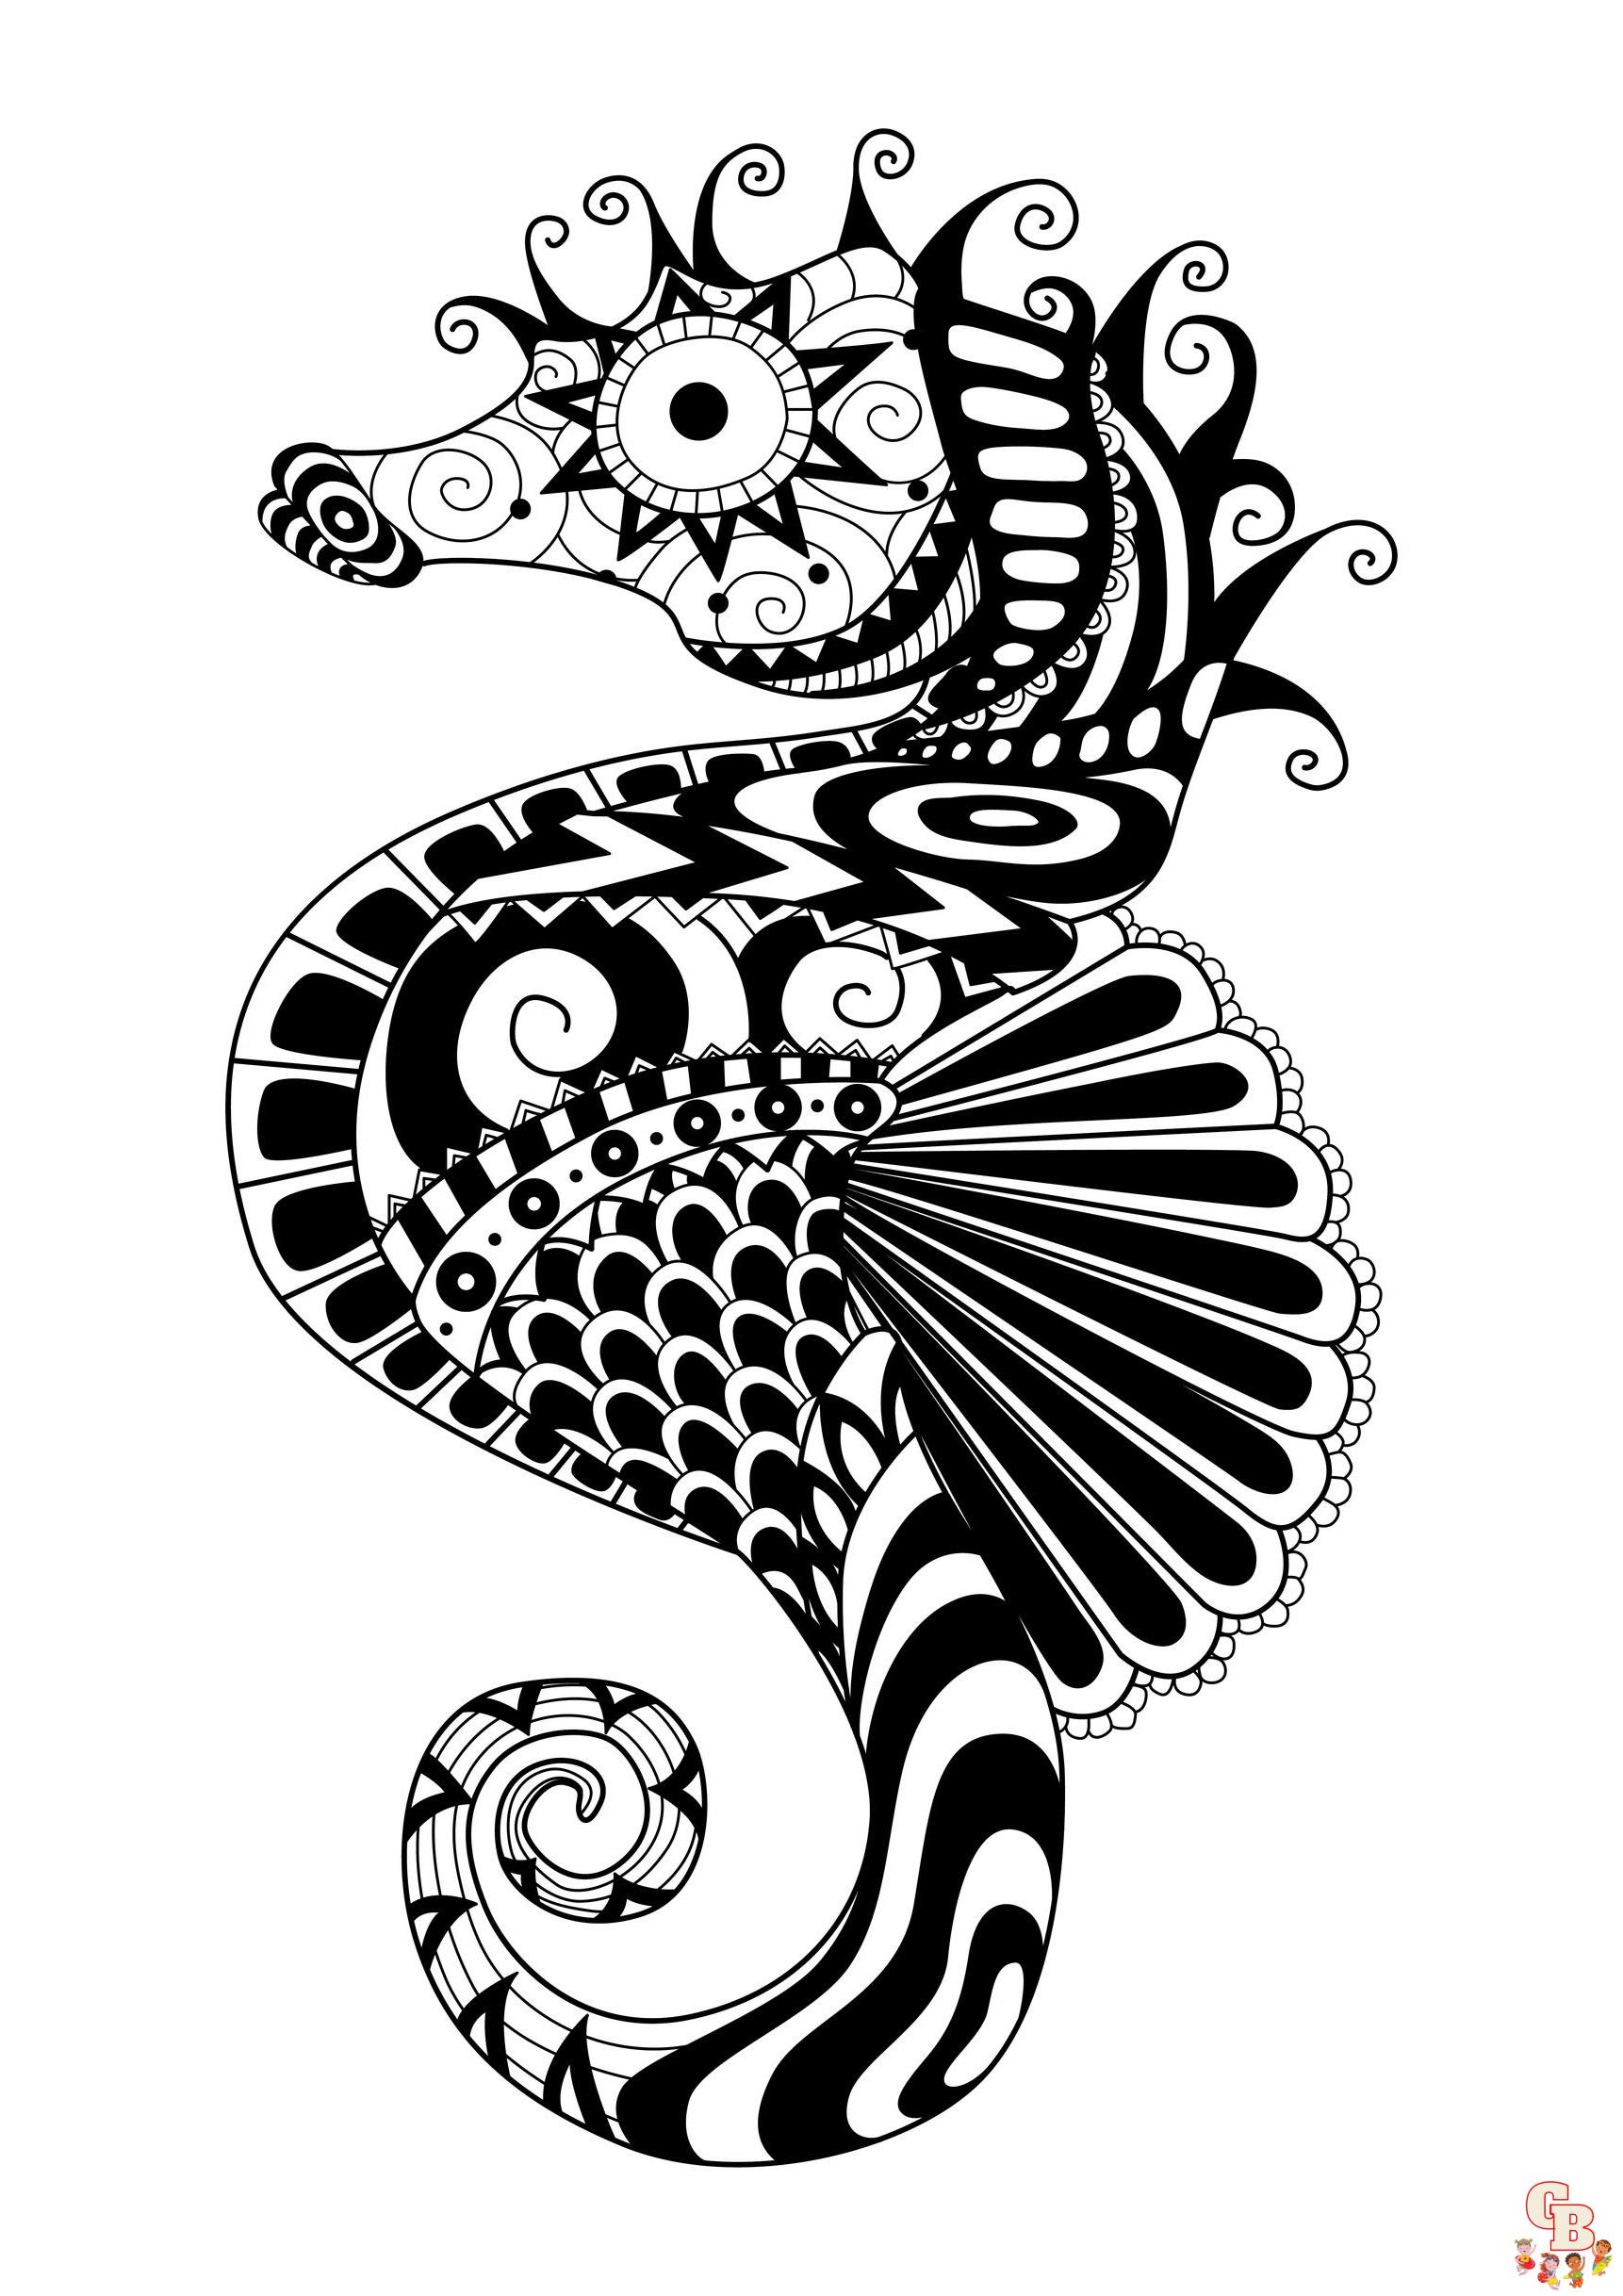 Fairytail Seahorse Coloring Pages